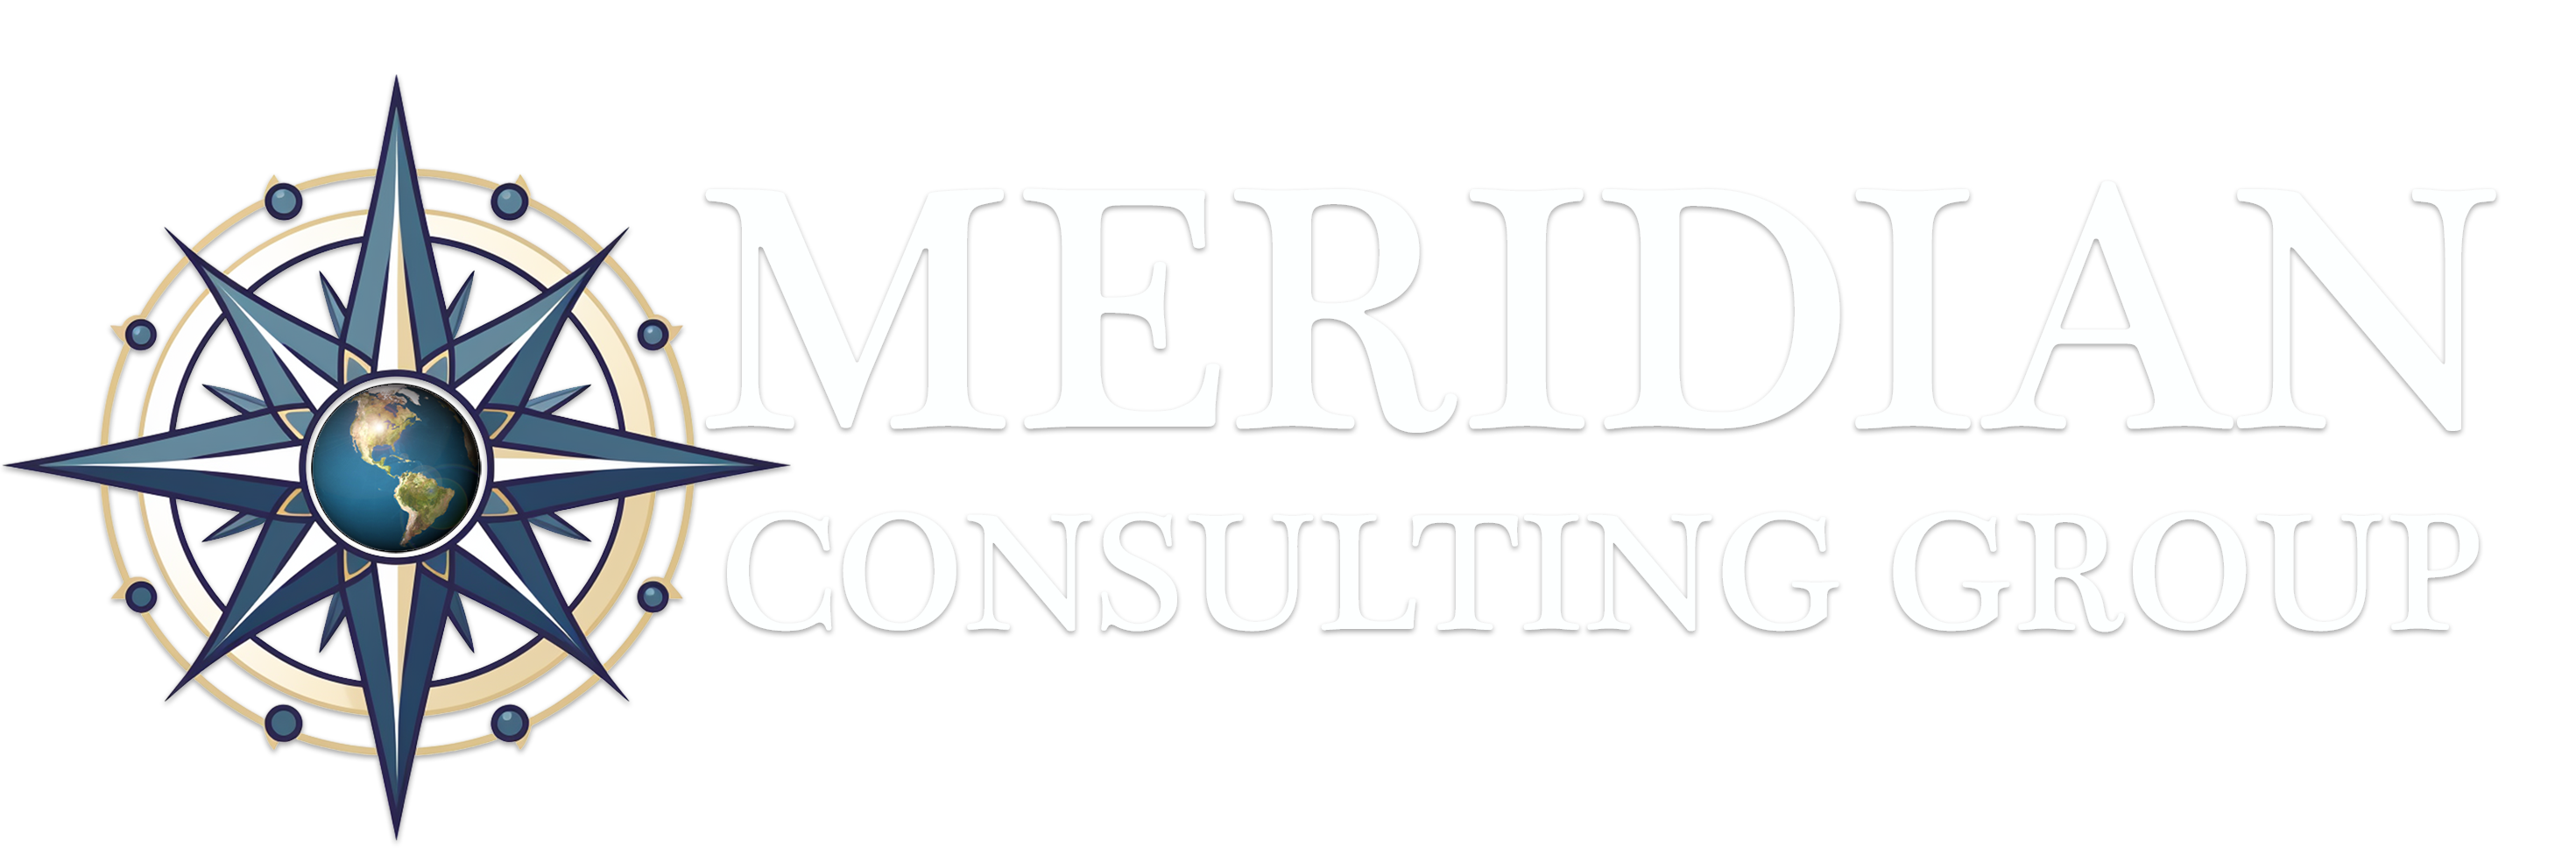 meridian consulting group logo 